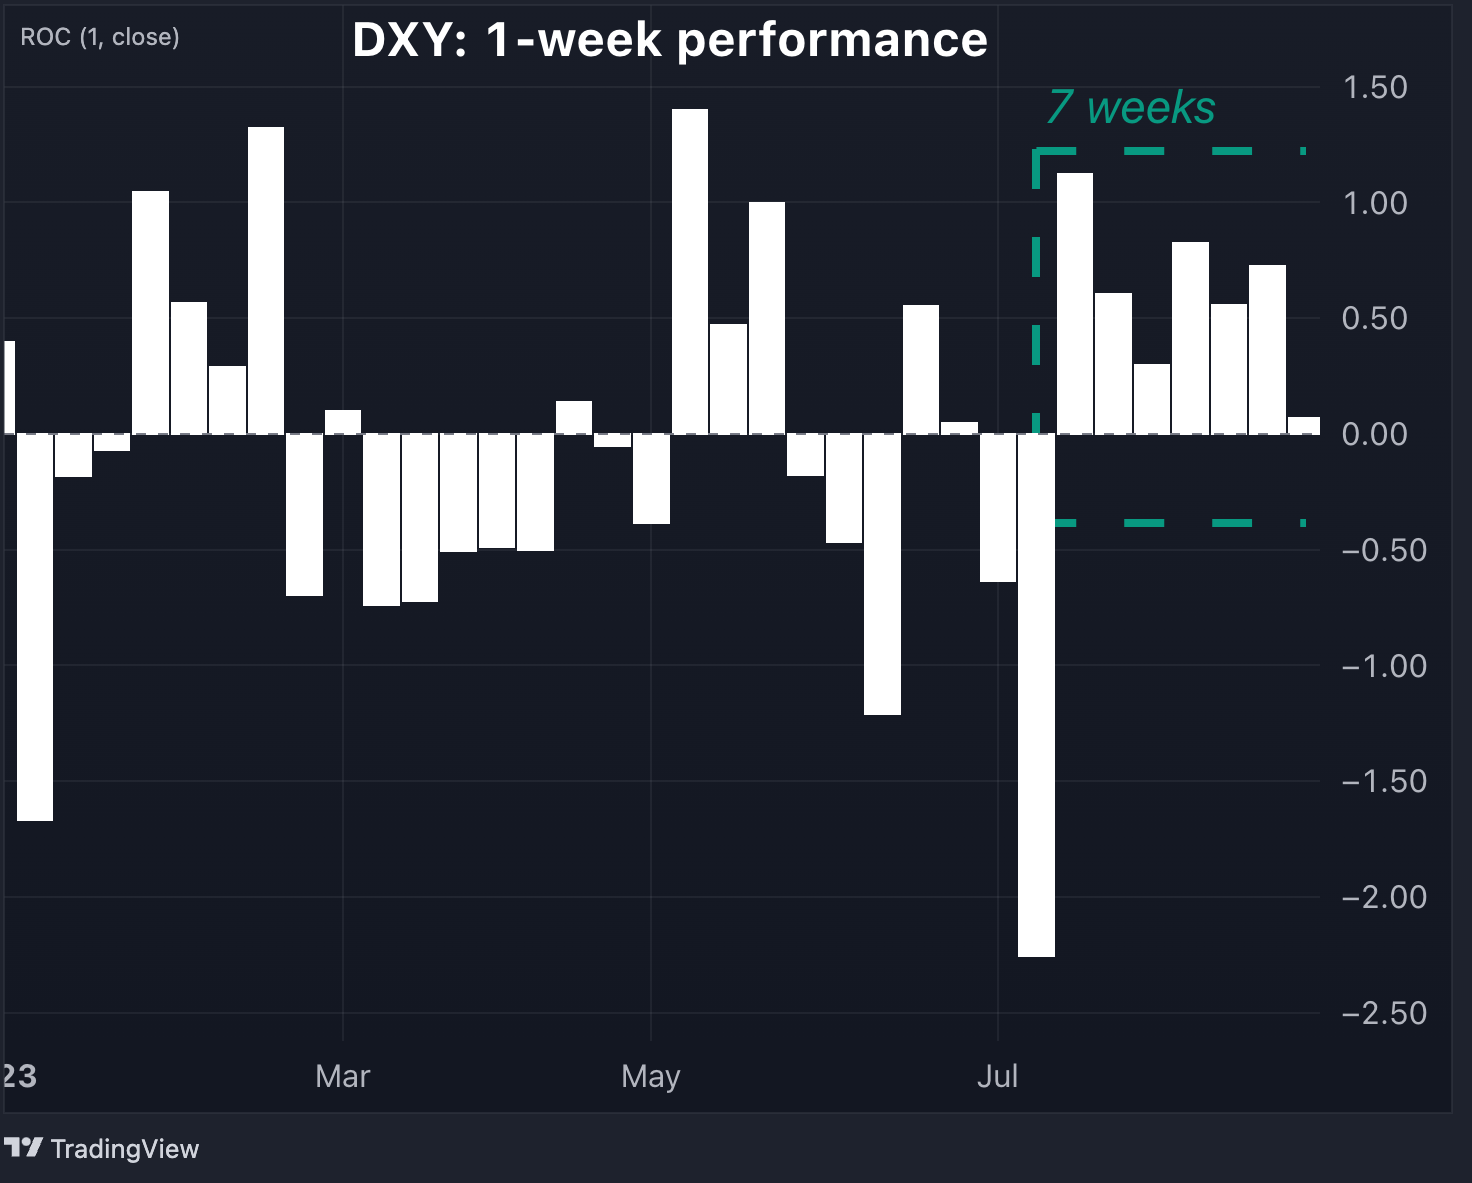 DXY 1 day performance